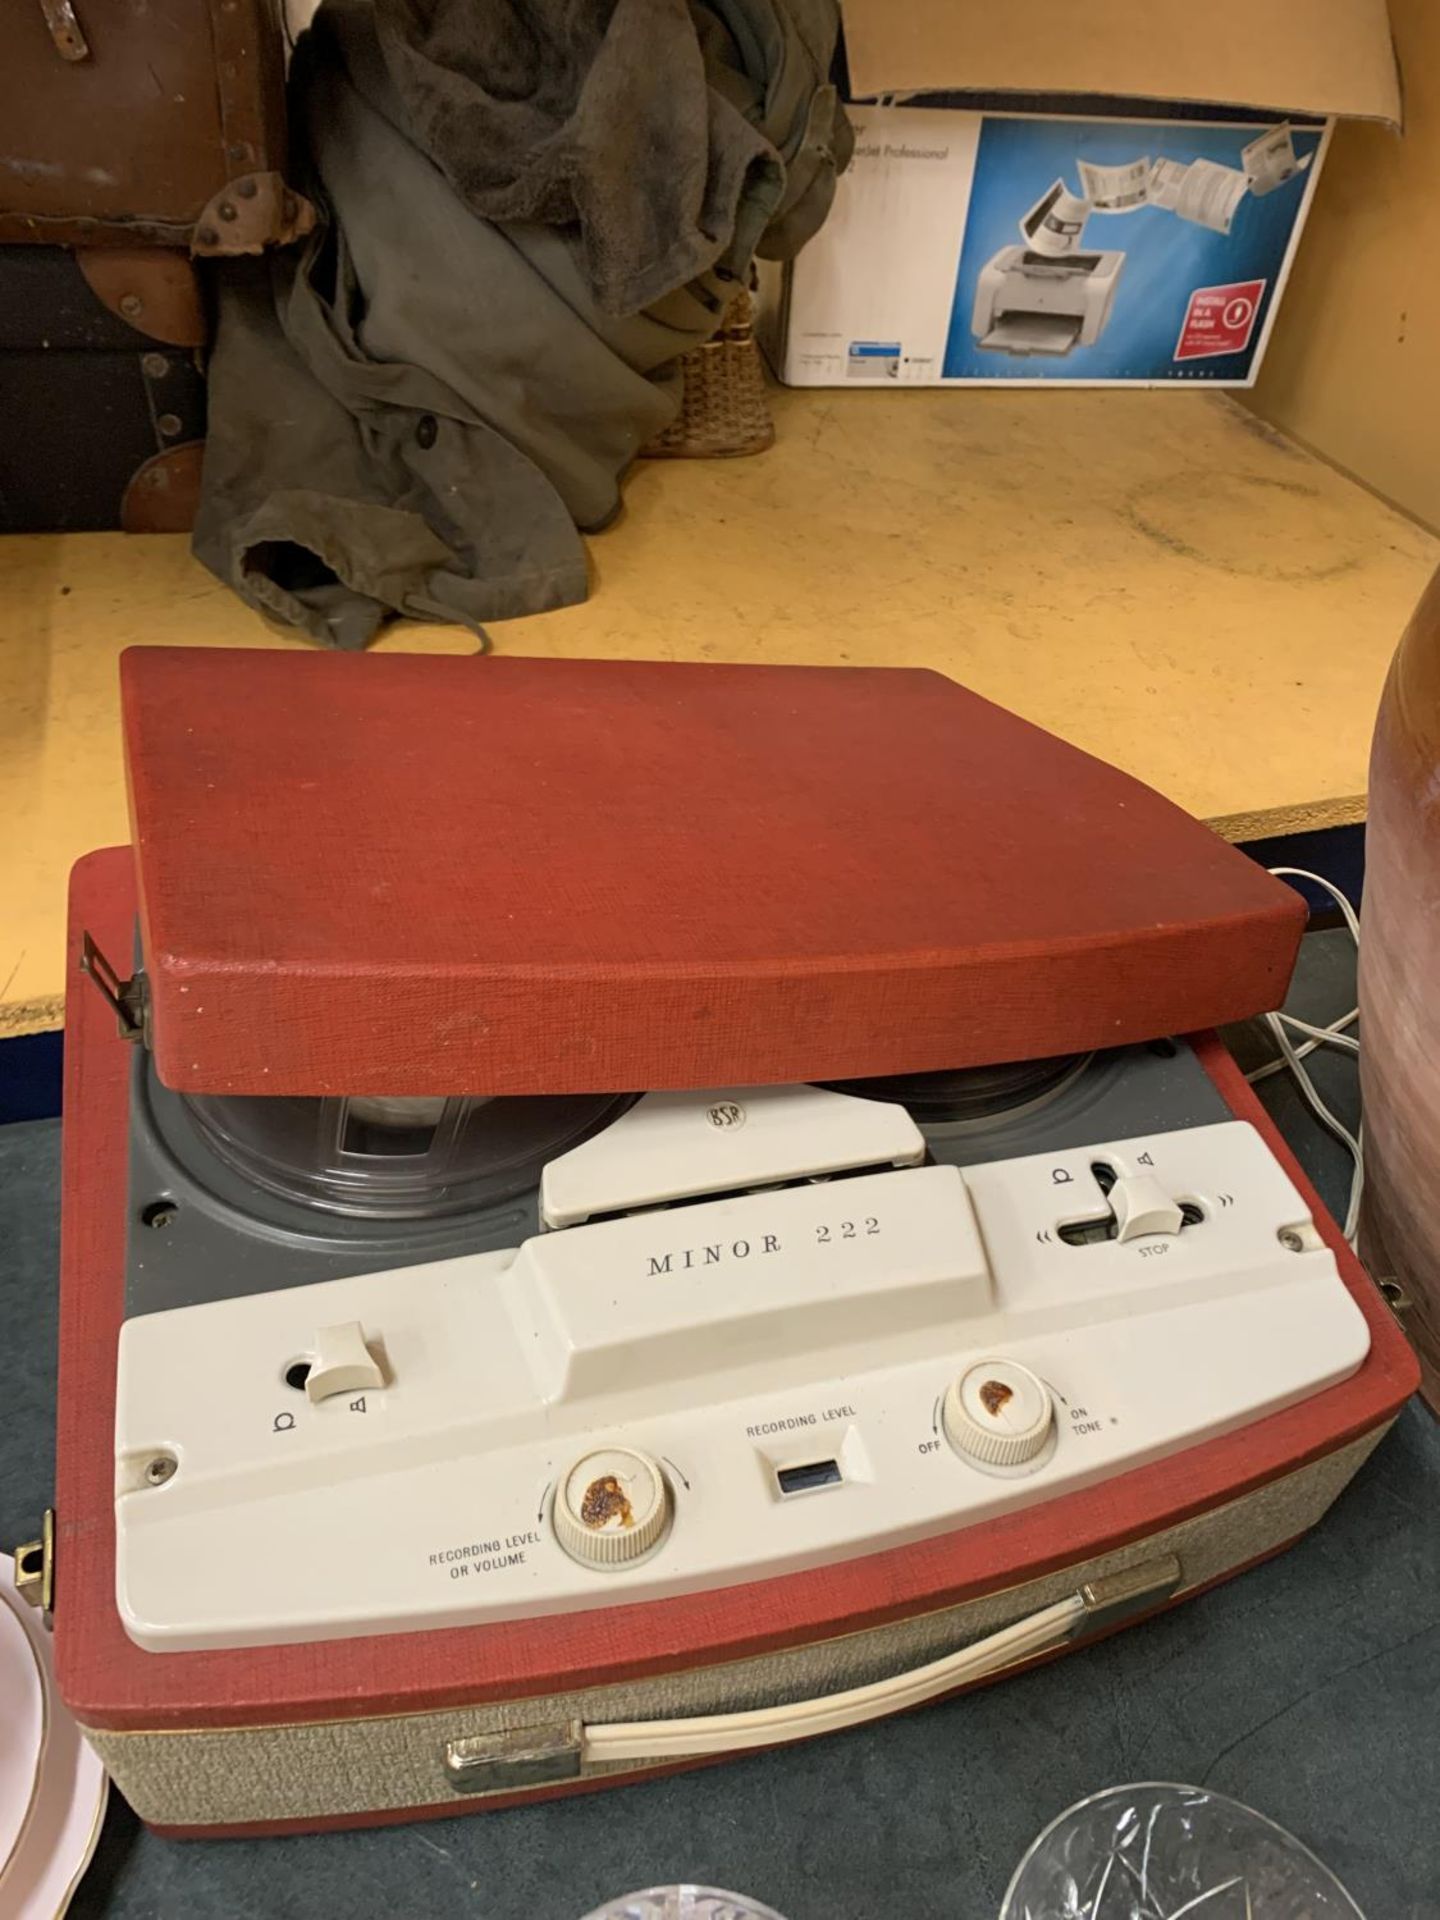 A BSR MINOR 222 TAPE TO TAPE RECORDER IN GOOD CONDITION